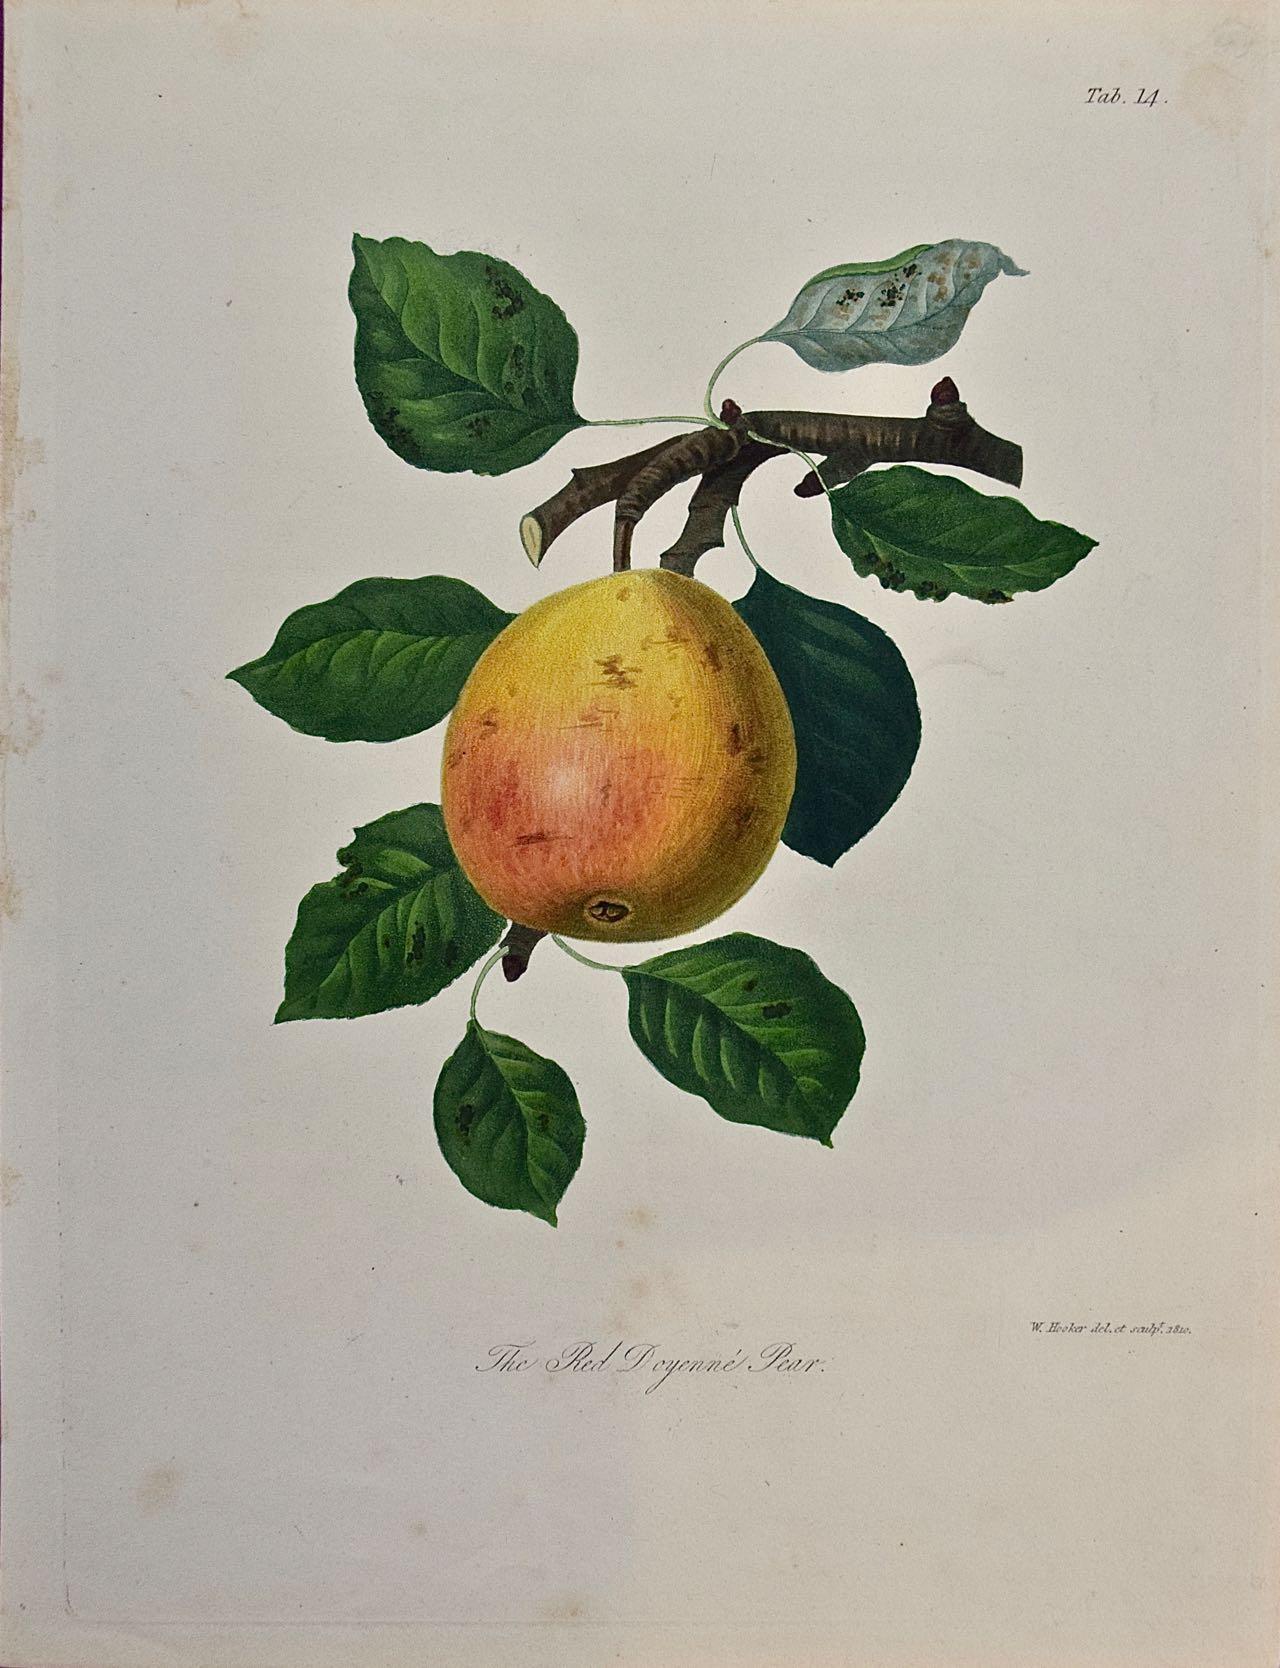 19th Century Hand-colored Engraving of a Red Doyenne Pear by Sir William Hooker